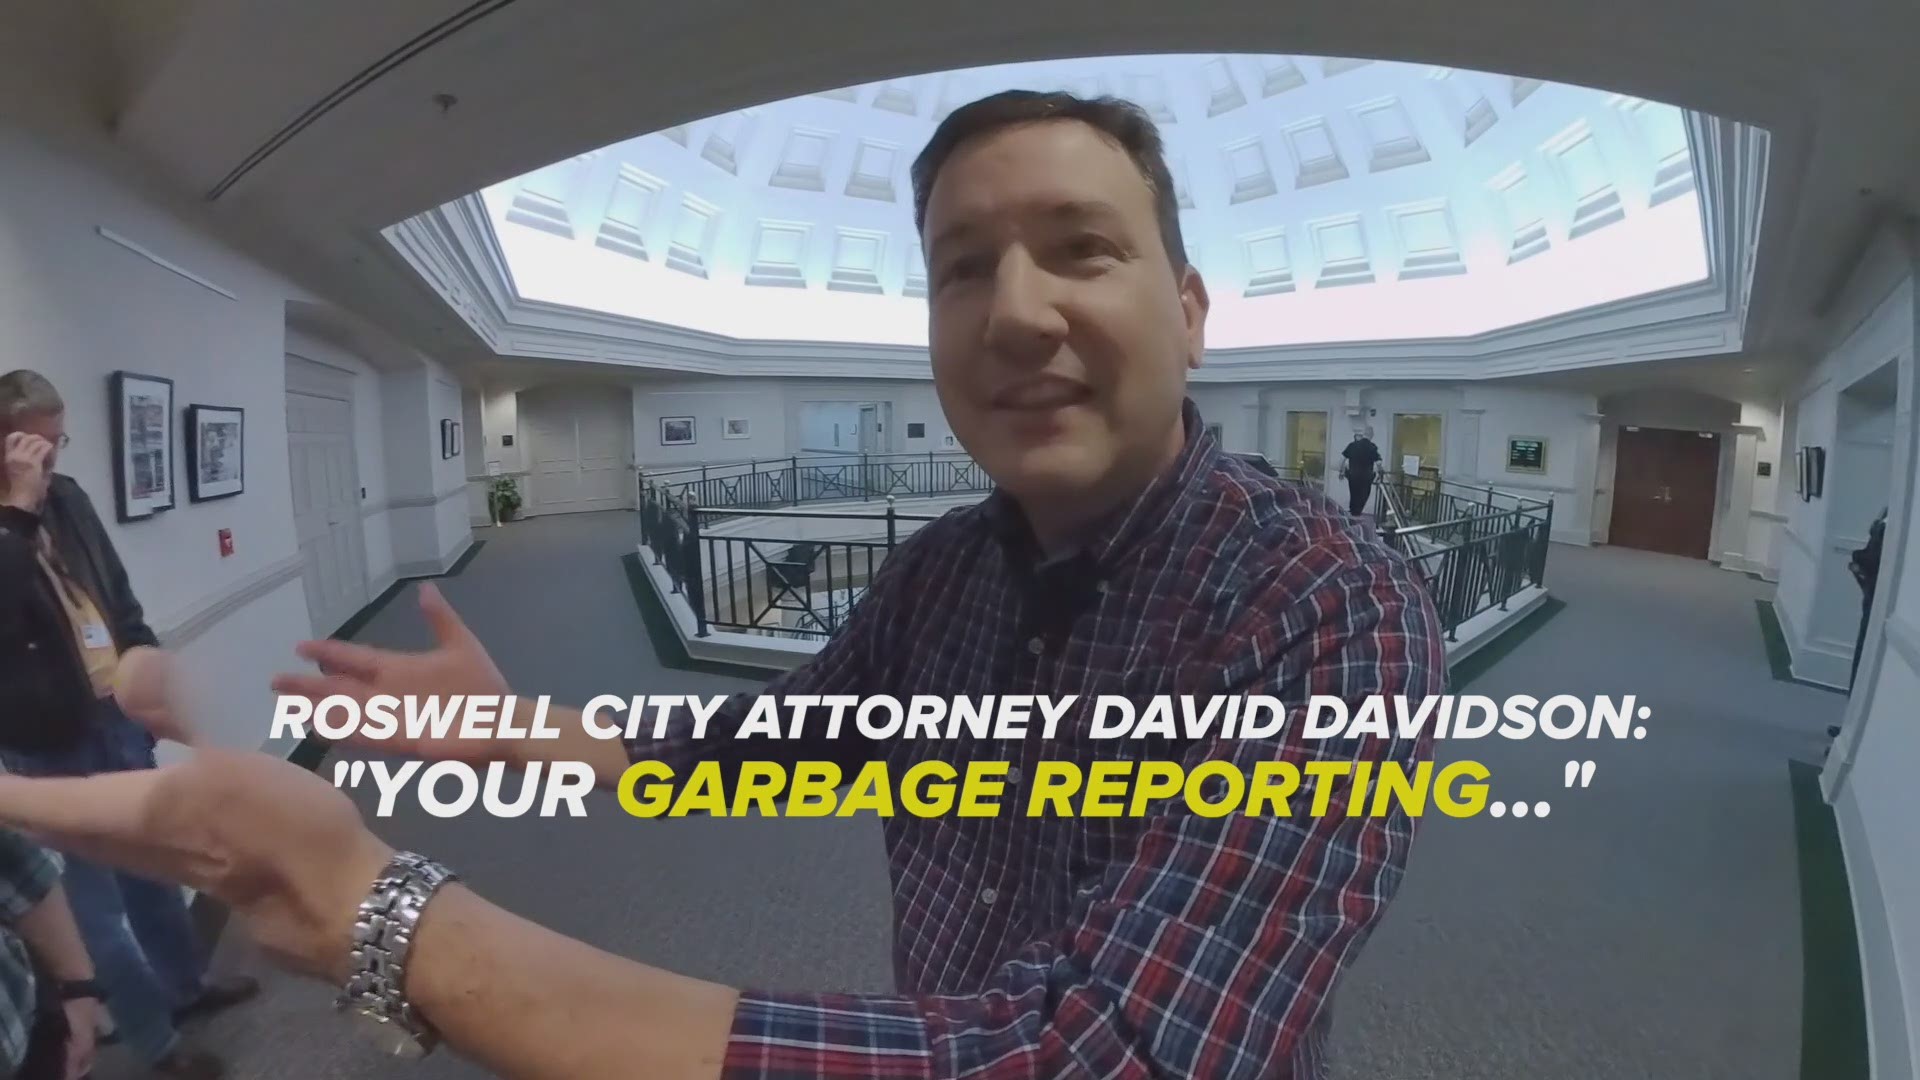 "GARBAGE REPORTING"
That's what Roswell's city attorney David Davidson called our series of investigative reports right before we were escorted out of City Hall by an armed city marshal. The city attorney claims an awards ceremony at City Hall -- with two dozen civilians and four city council members speaking to the crowd -- is a PRIVATE event, closed to the press. We were the only ones kicked out, under the threat of arrest for trespassing at City Hall because we didn't have "an invitation", after our series of investigative reports on the police department. 
The police chief resigned last week, the deputy chief also retired, three officers were fired, and the supervisor of the year was demoted after we demanded internal records. We were at the awards event to document several officers getting medals for saving a man's life.